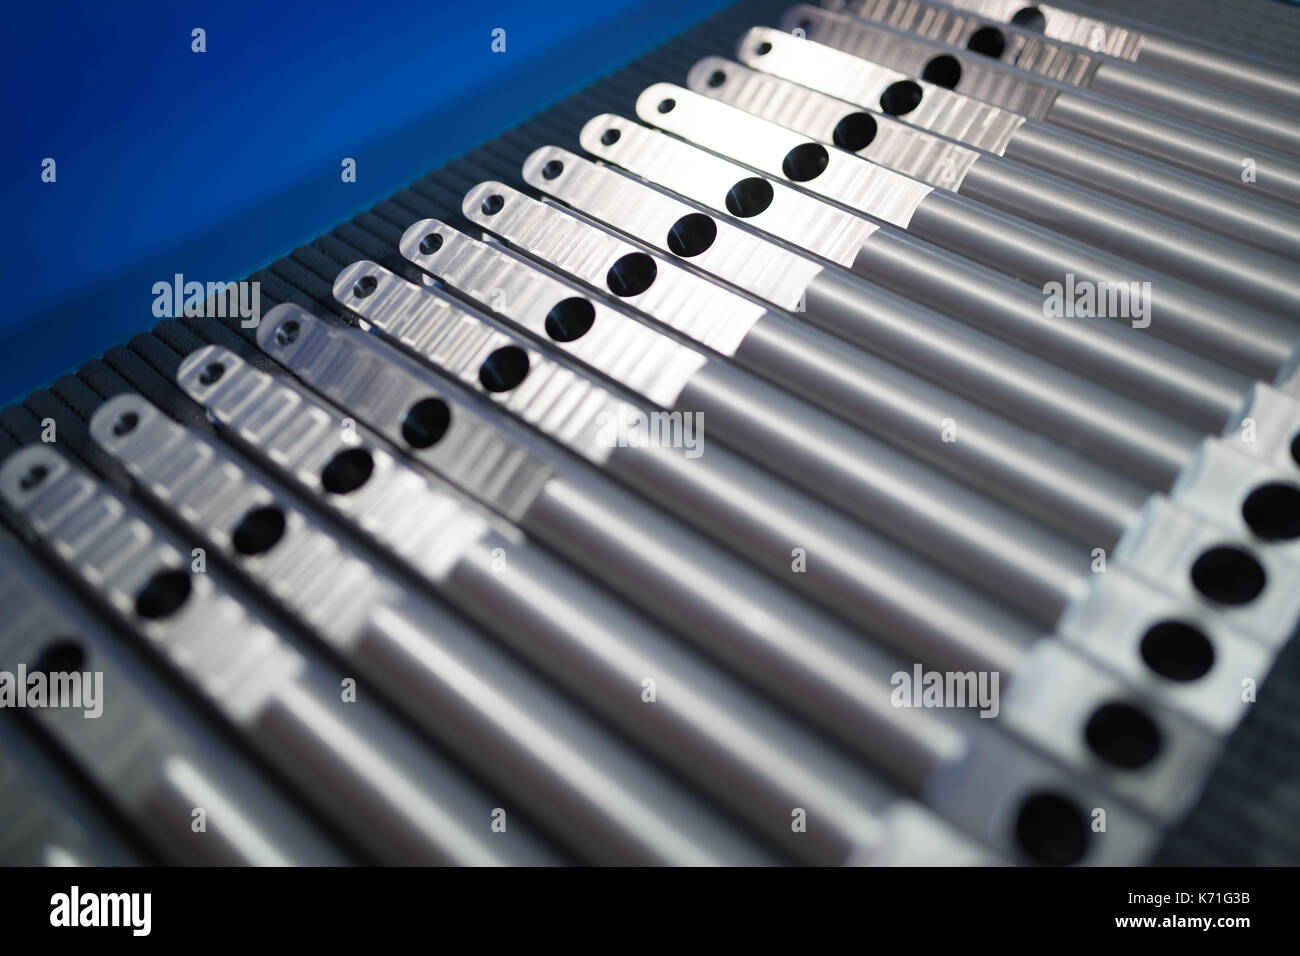 aluminum metal raw material in the form of long rods Stock Photo